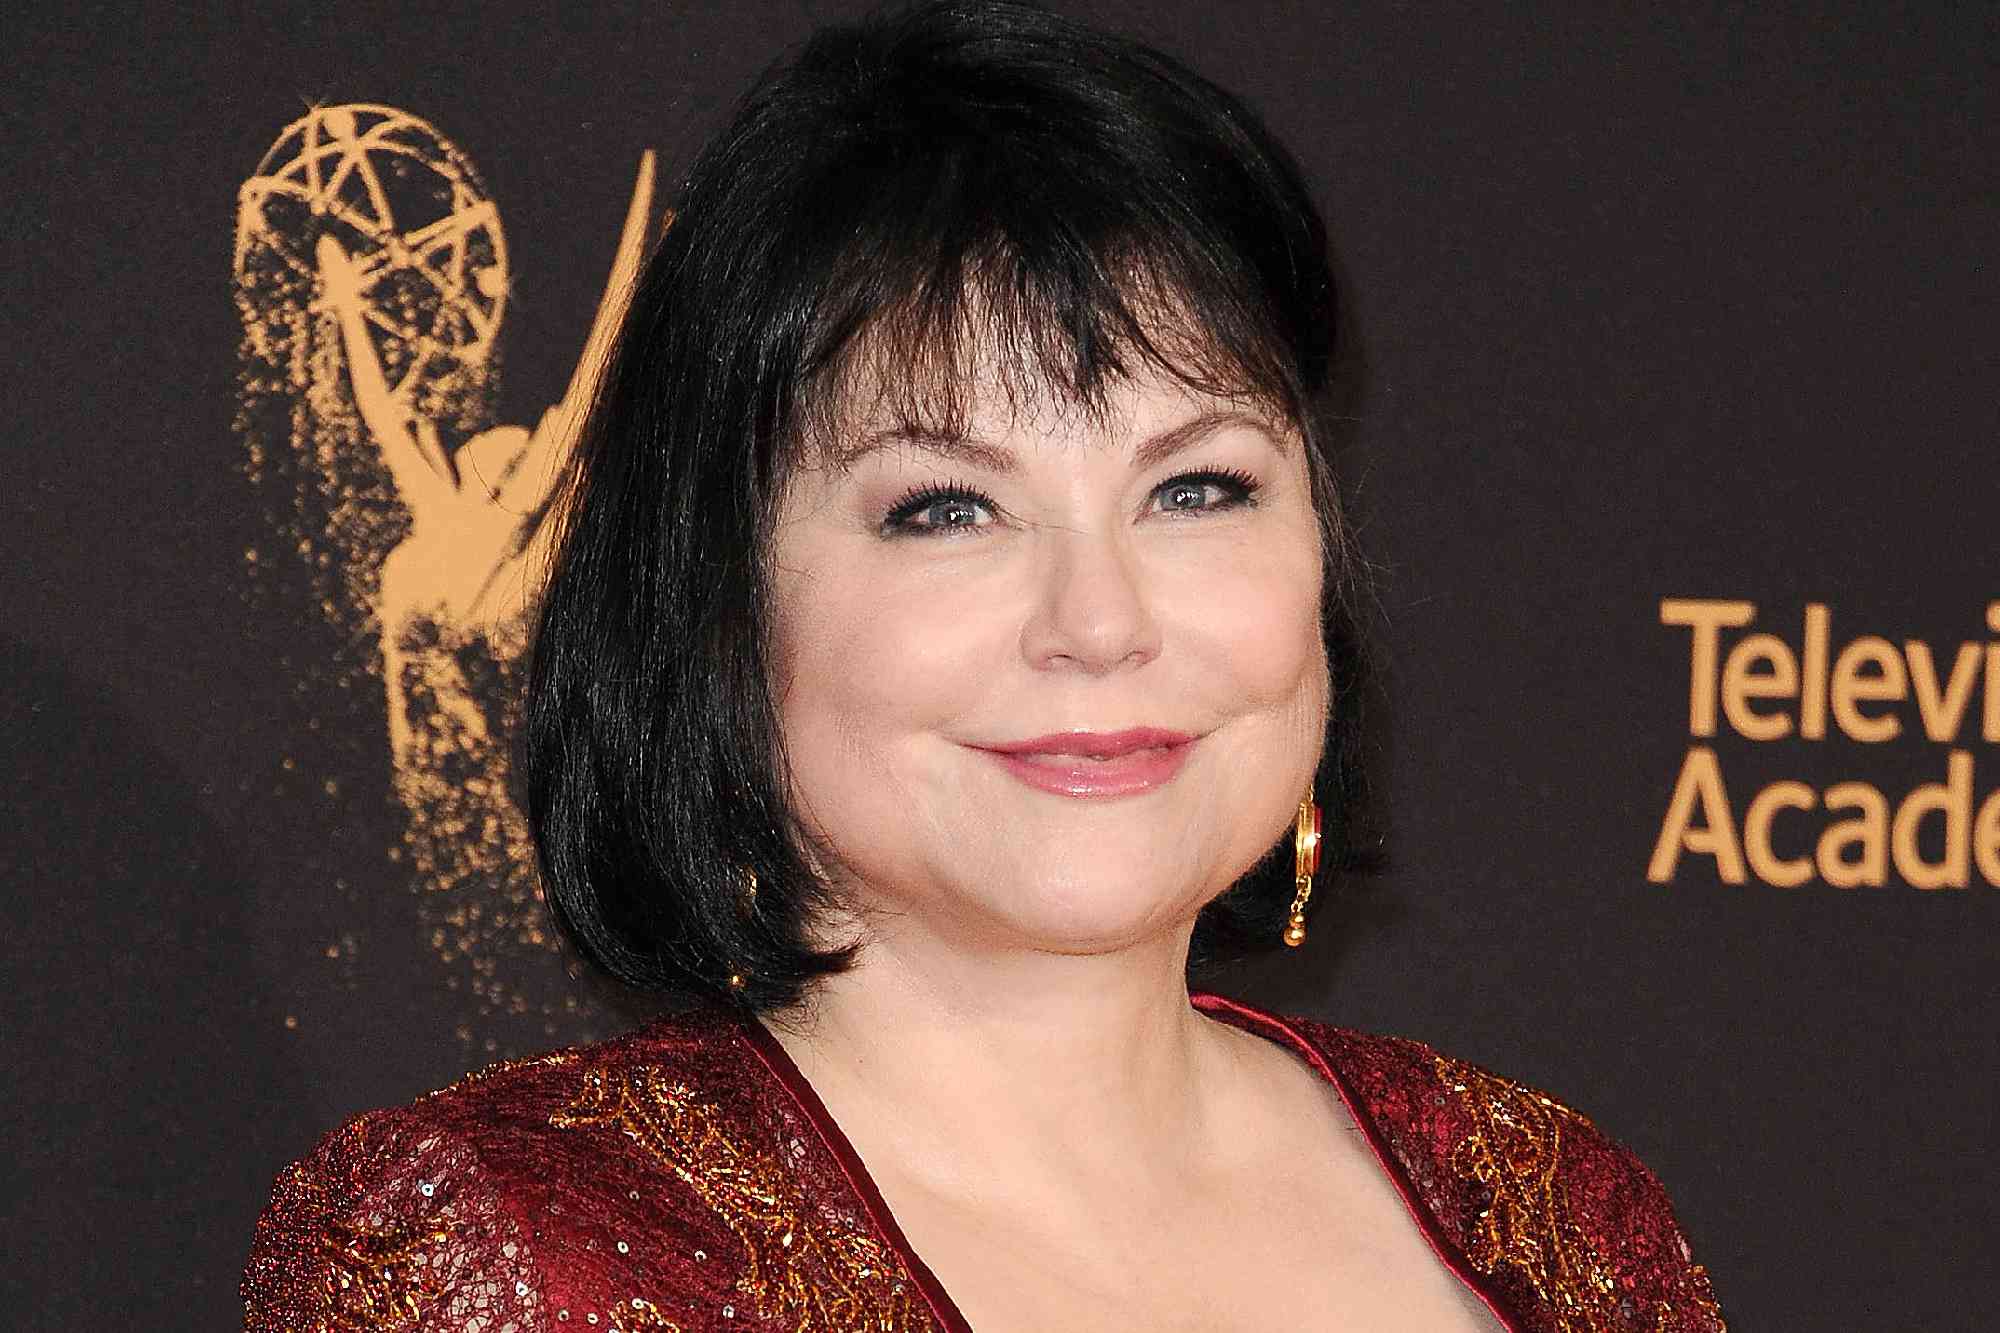 Delta Burke Opens Up About ‘Ugly and Very Sad’ Exit from “Designing Women”: ‘I Simply Couldn’t Cope’